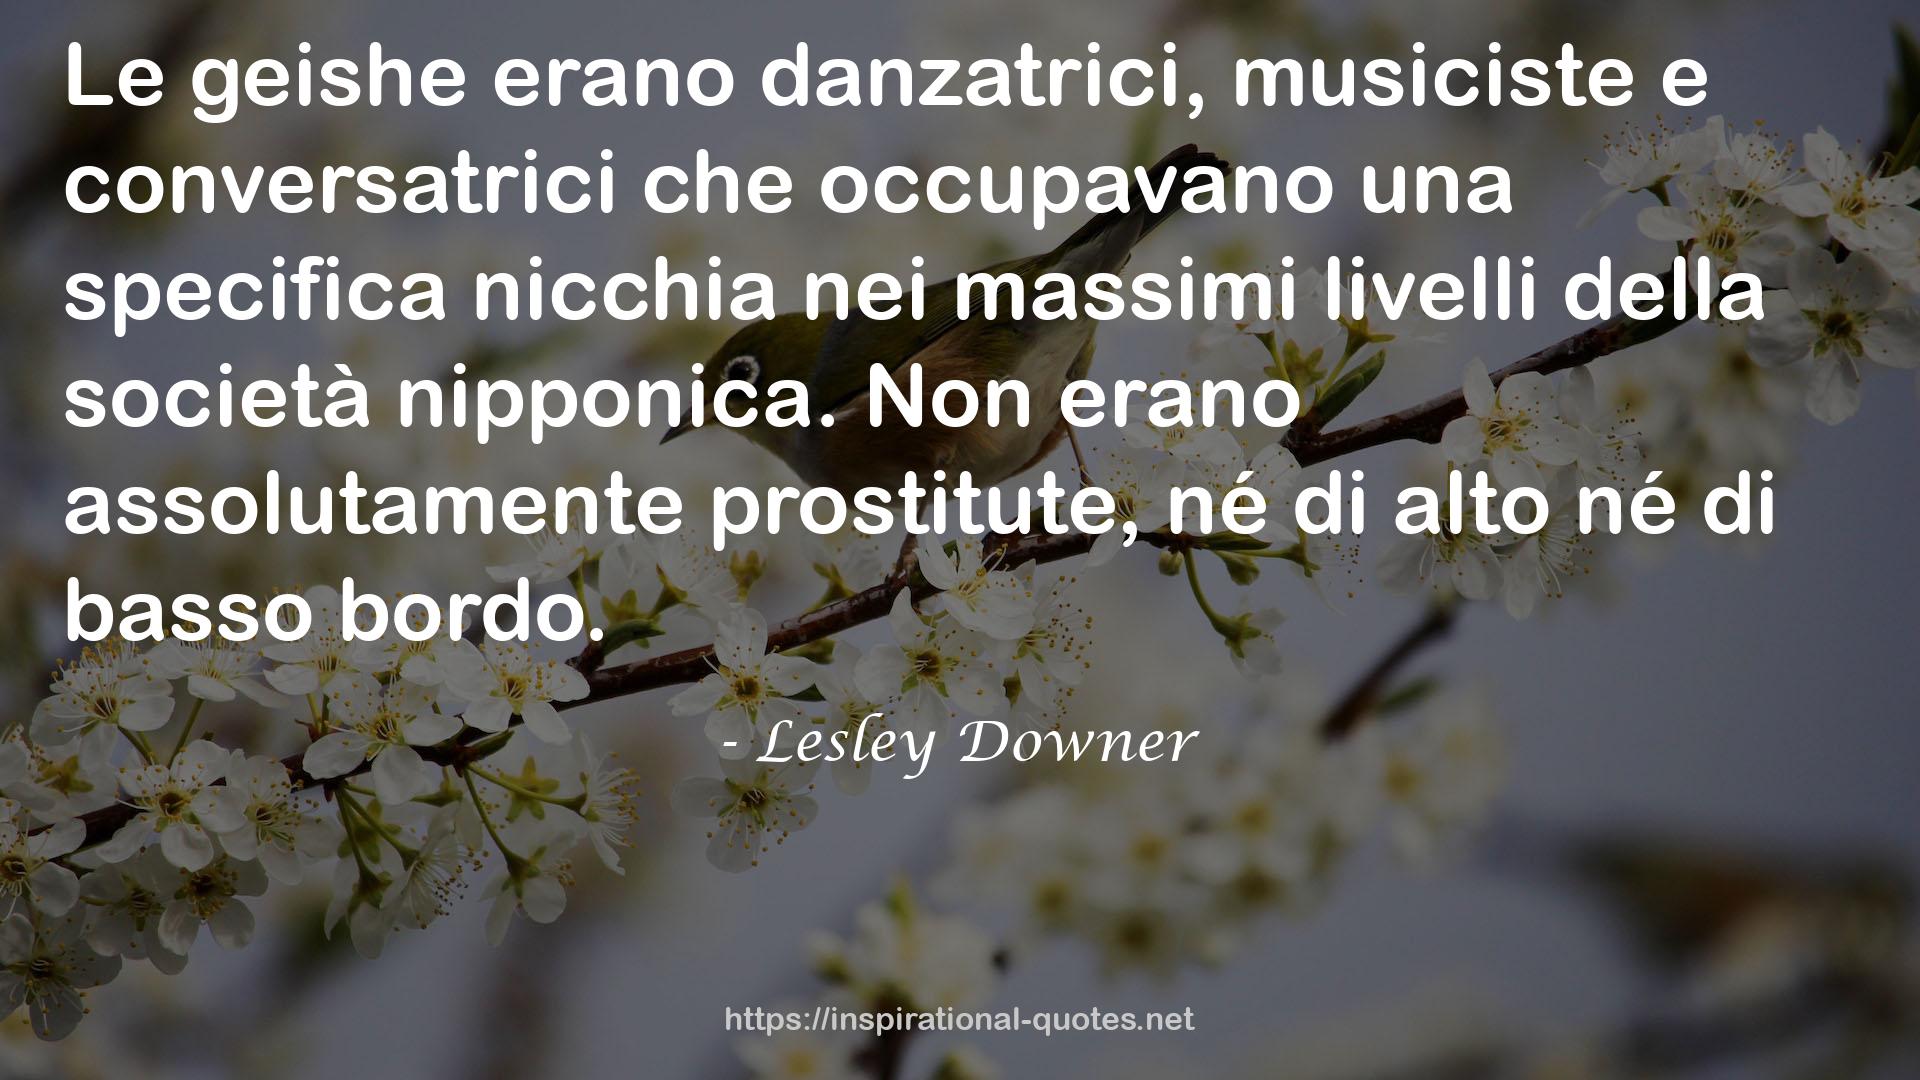 Lesley Downer QUOTES